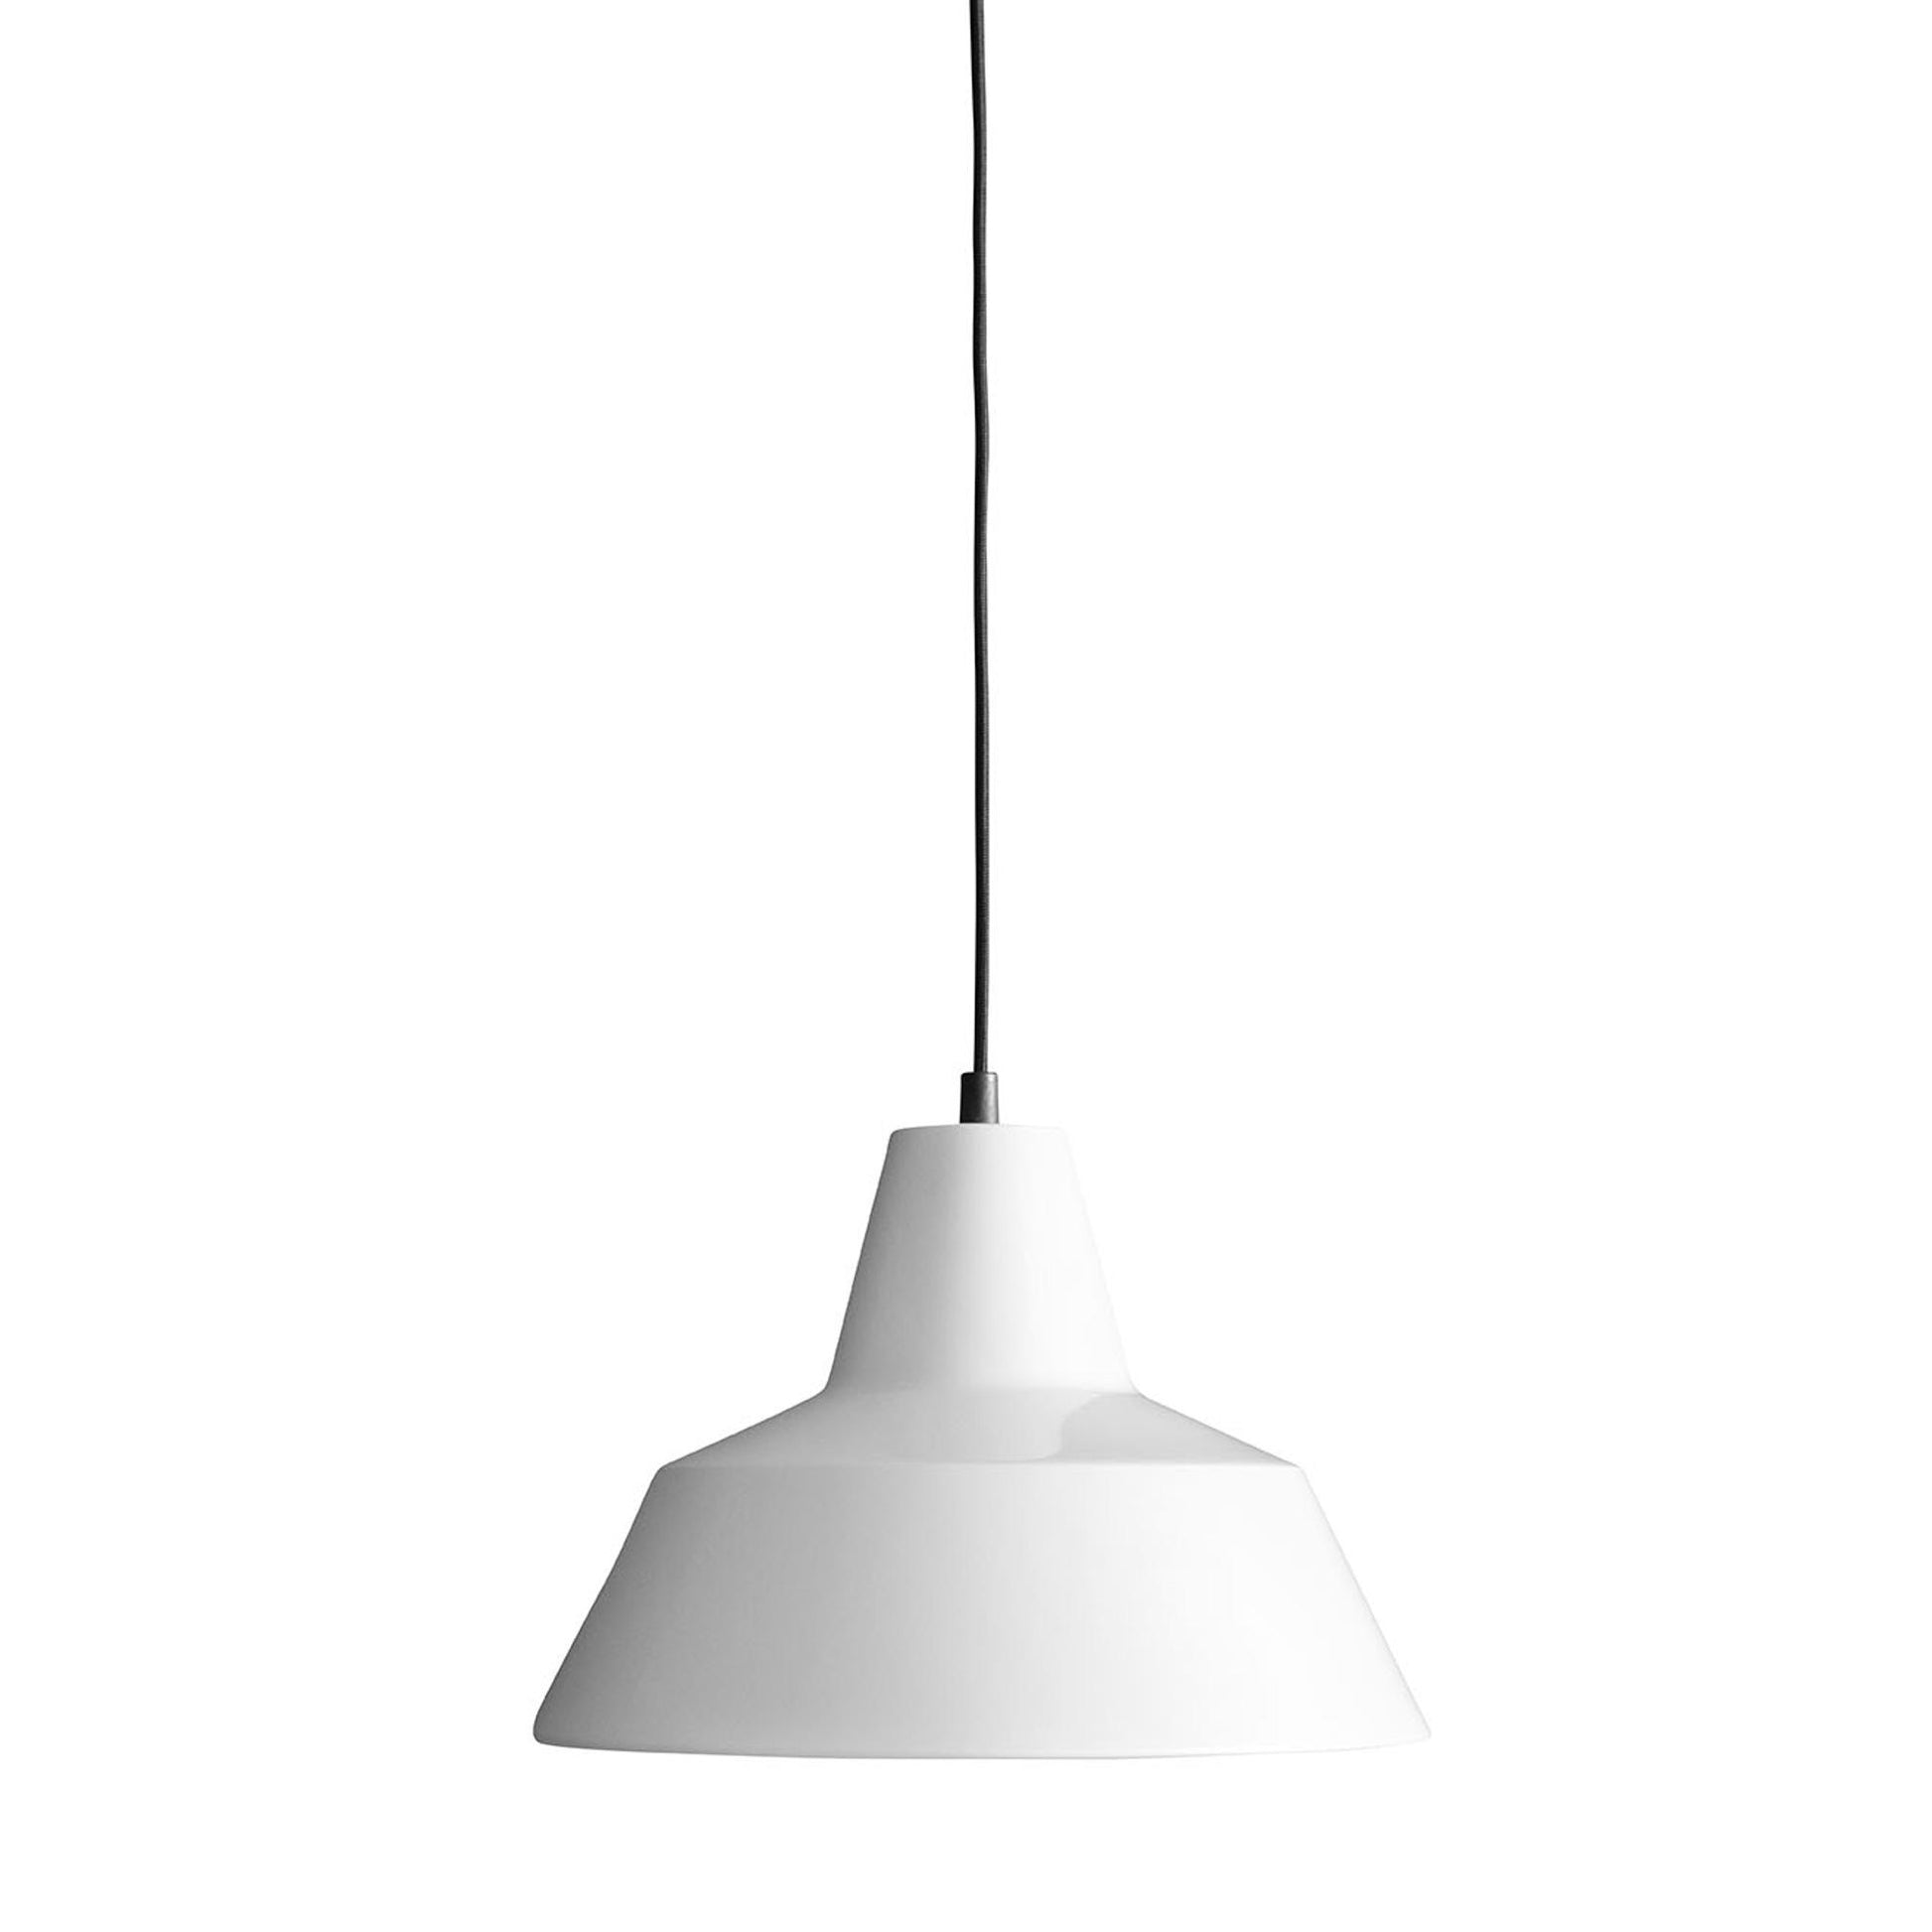 Workshop Lamp Pendant Lamp W3 by Made By Hand #White